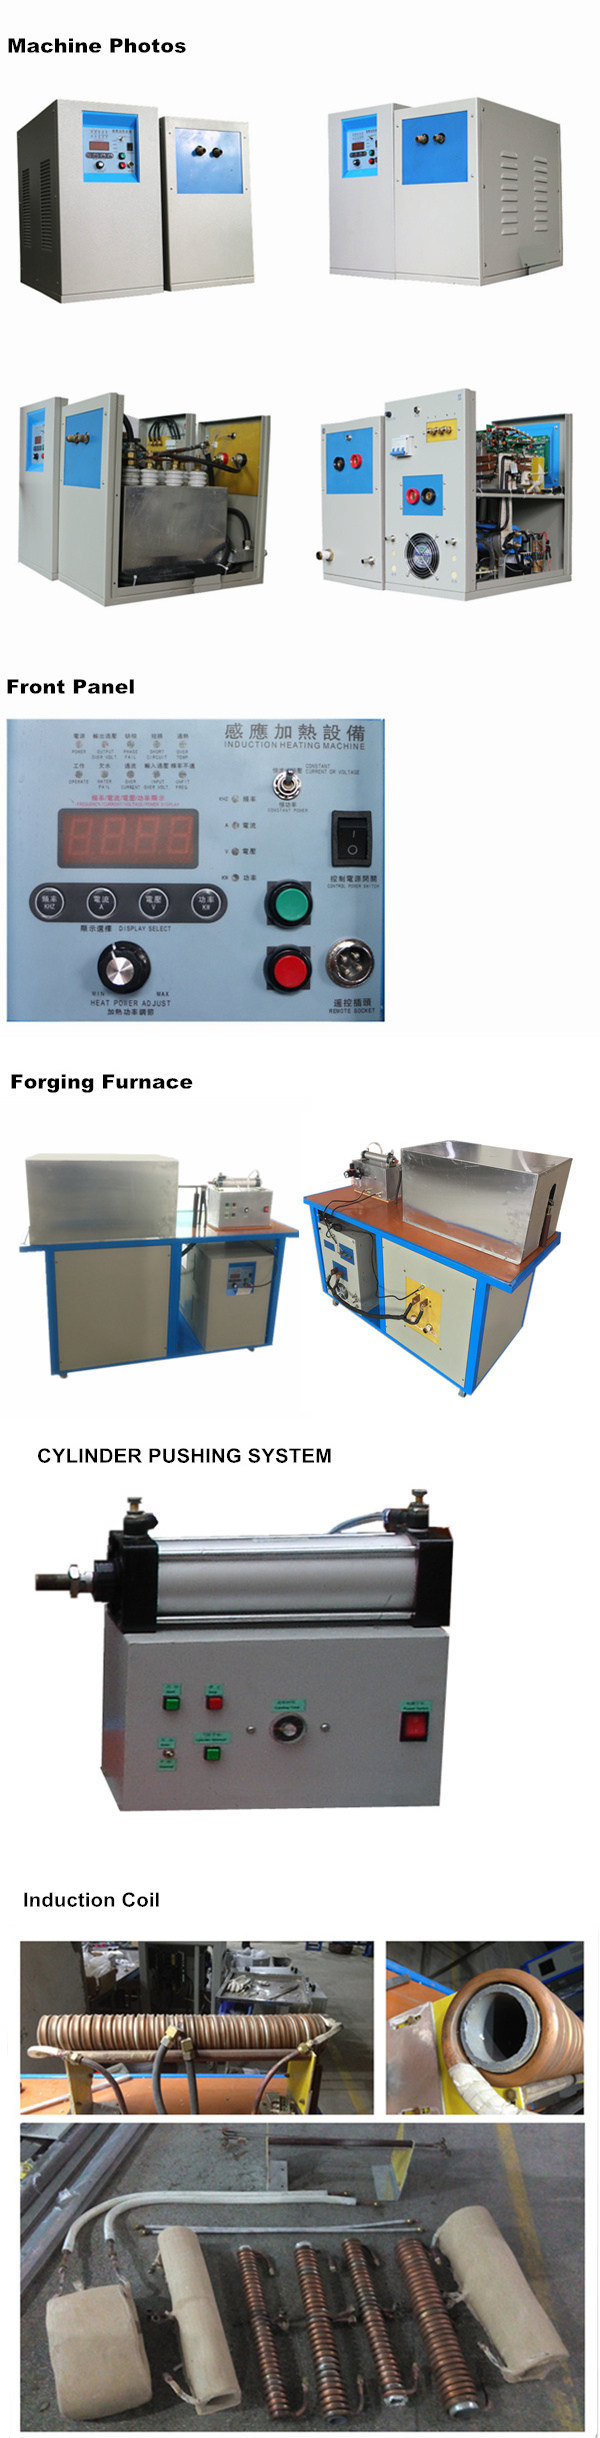 Automatic Metal Hot Forging Induction Heating Machine (JLZ-45)